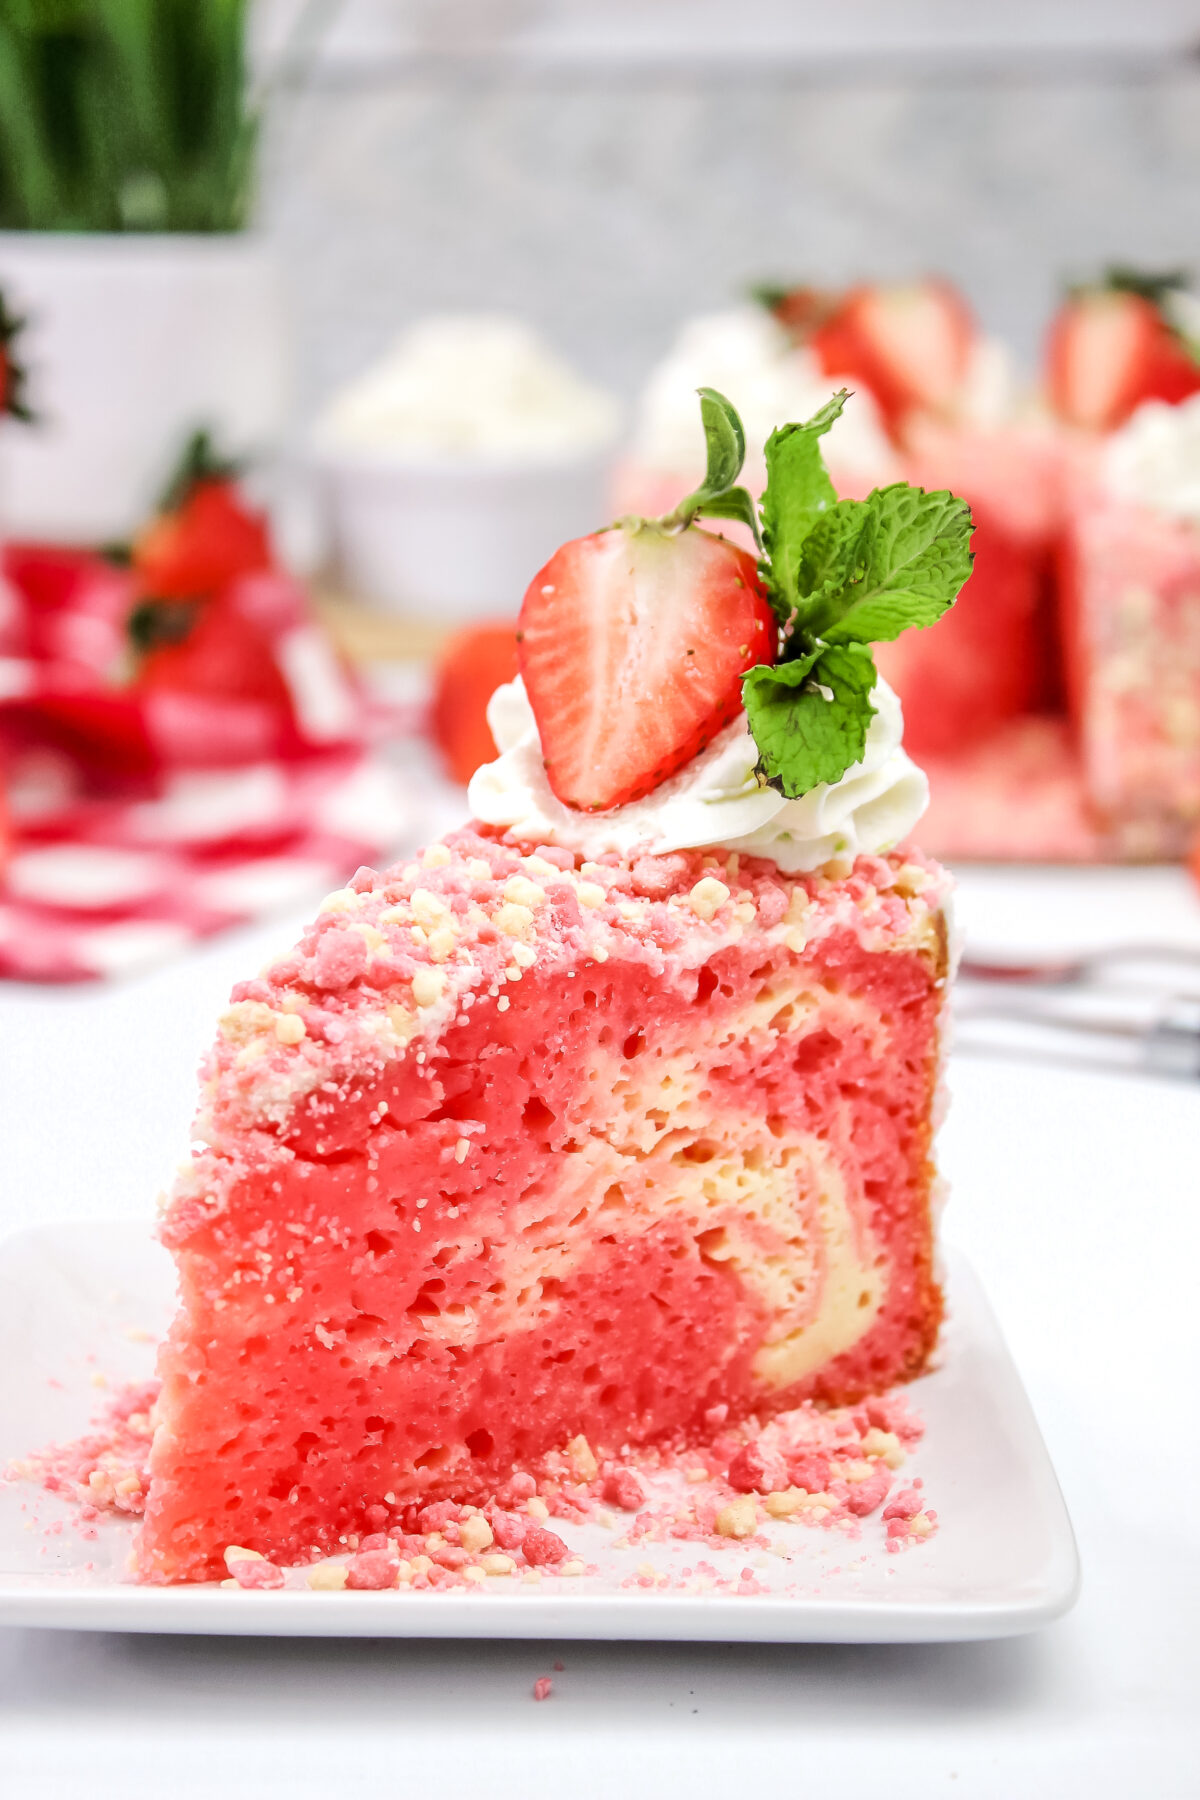 Looking for an amazing cake recipe? This strawberry crunch cheesecake cake is easy to make and will wow your taste buds!